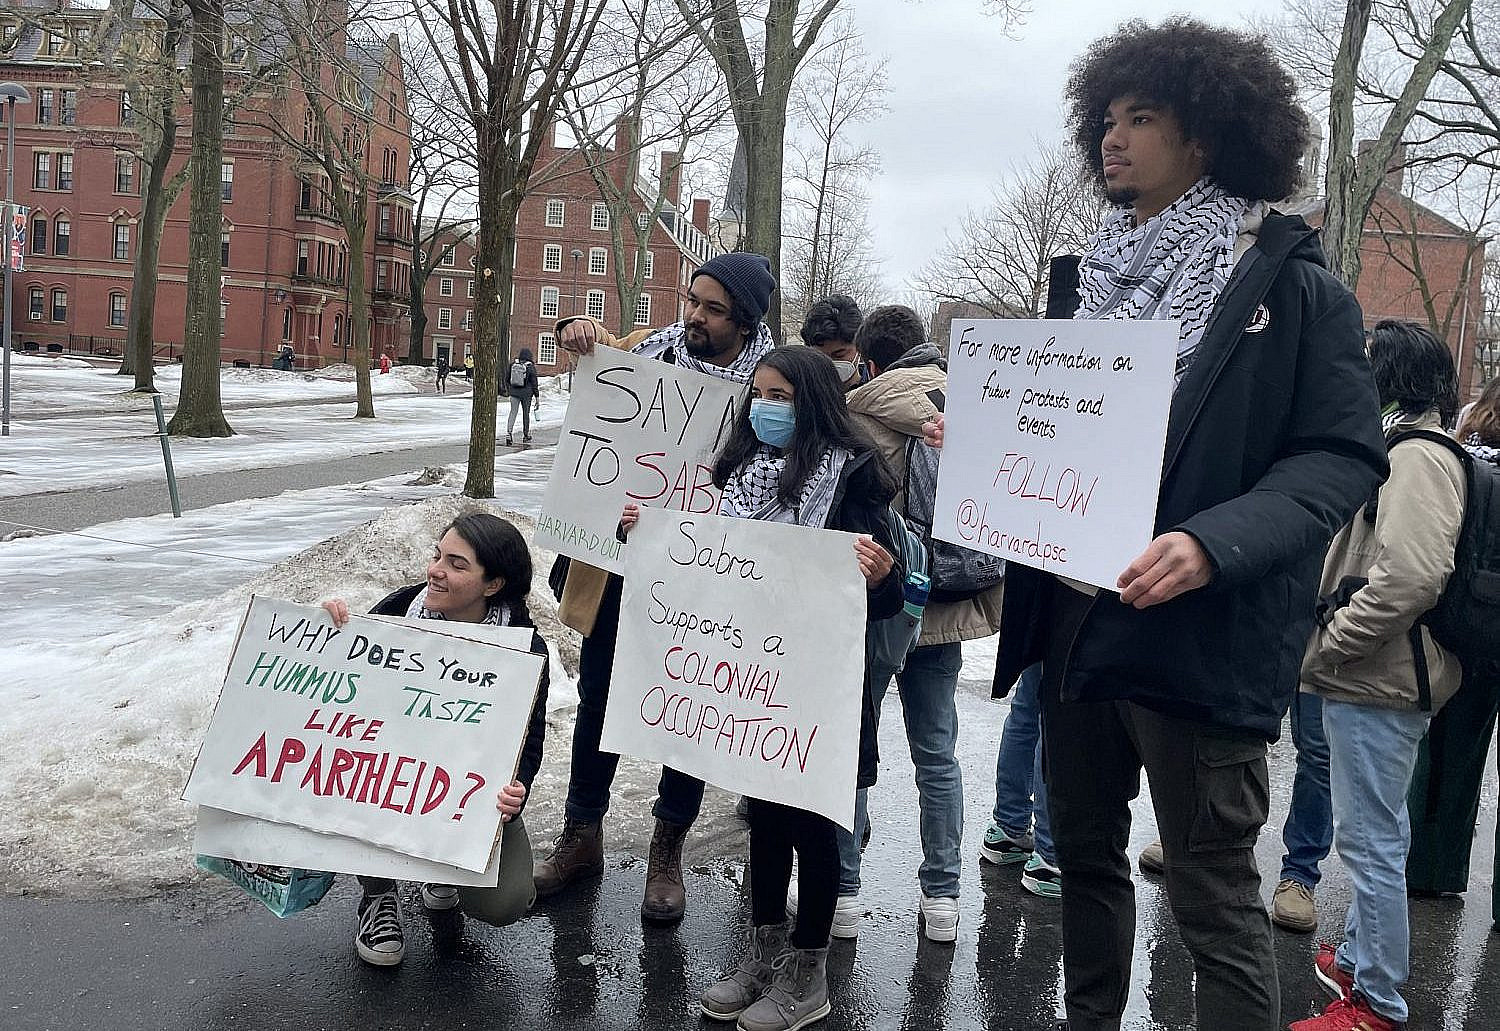 Members of Harvard PSC participate in a pro-Palestine protest on campus. (Courtesy of Harvard PSC)